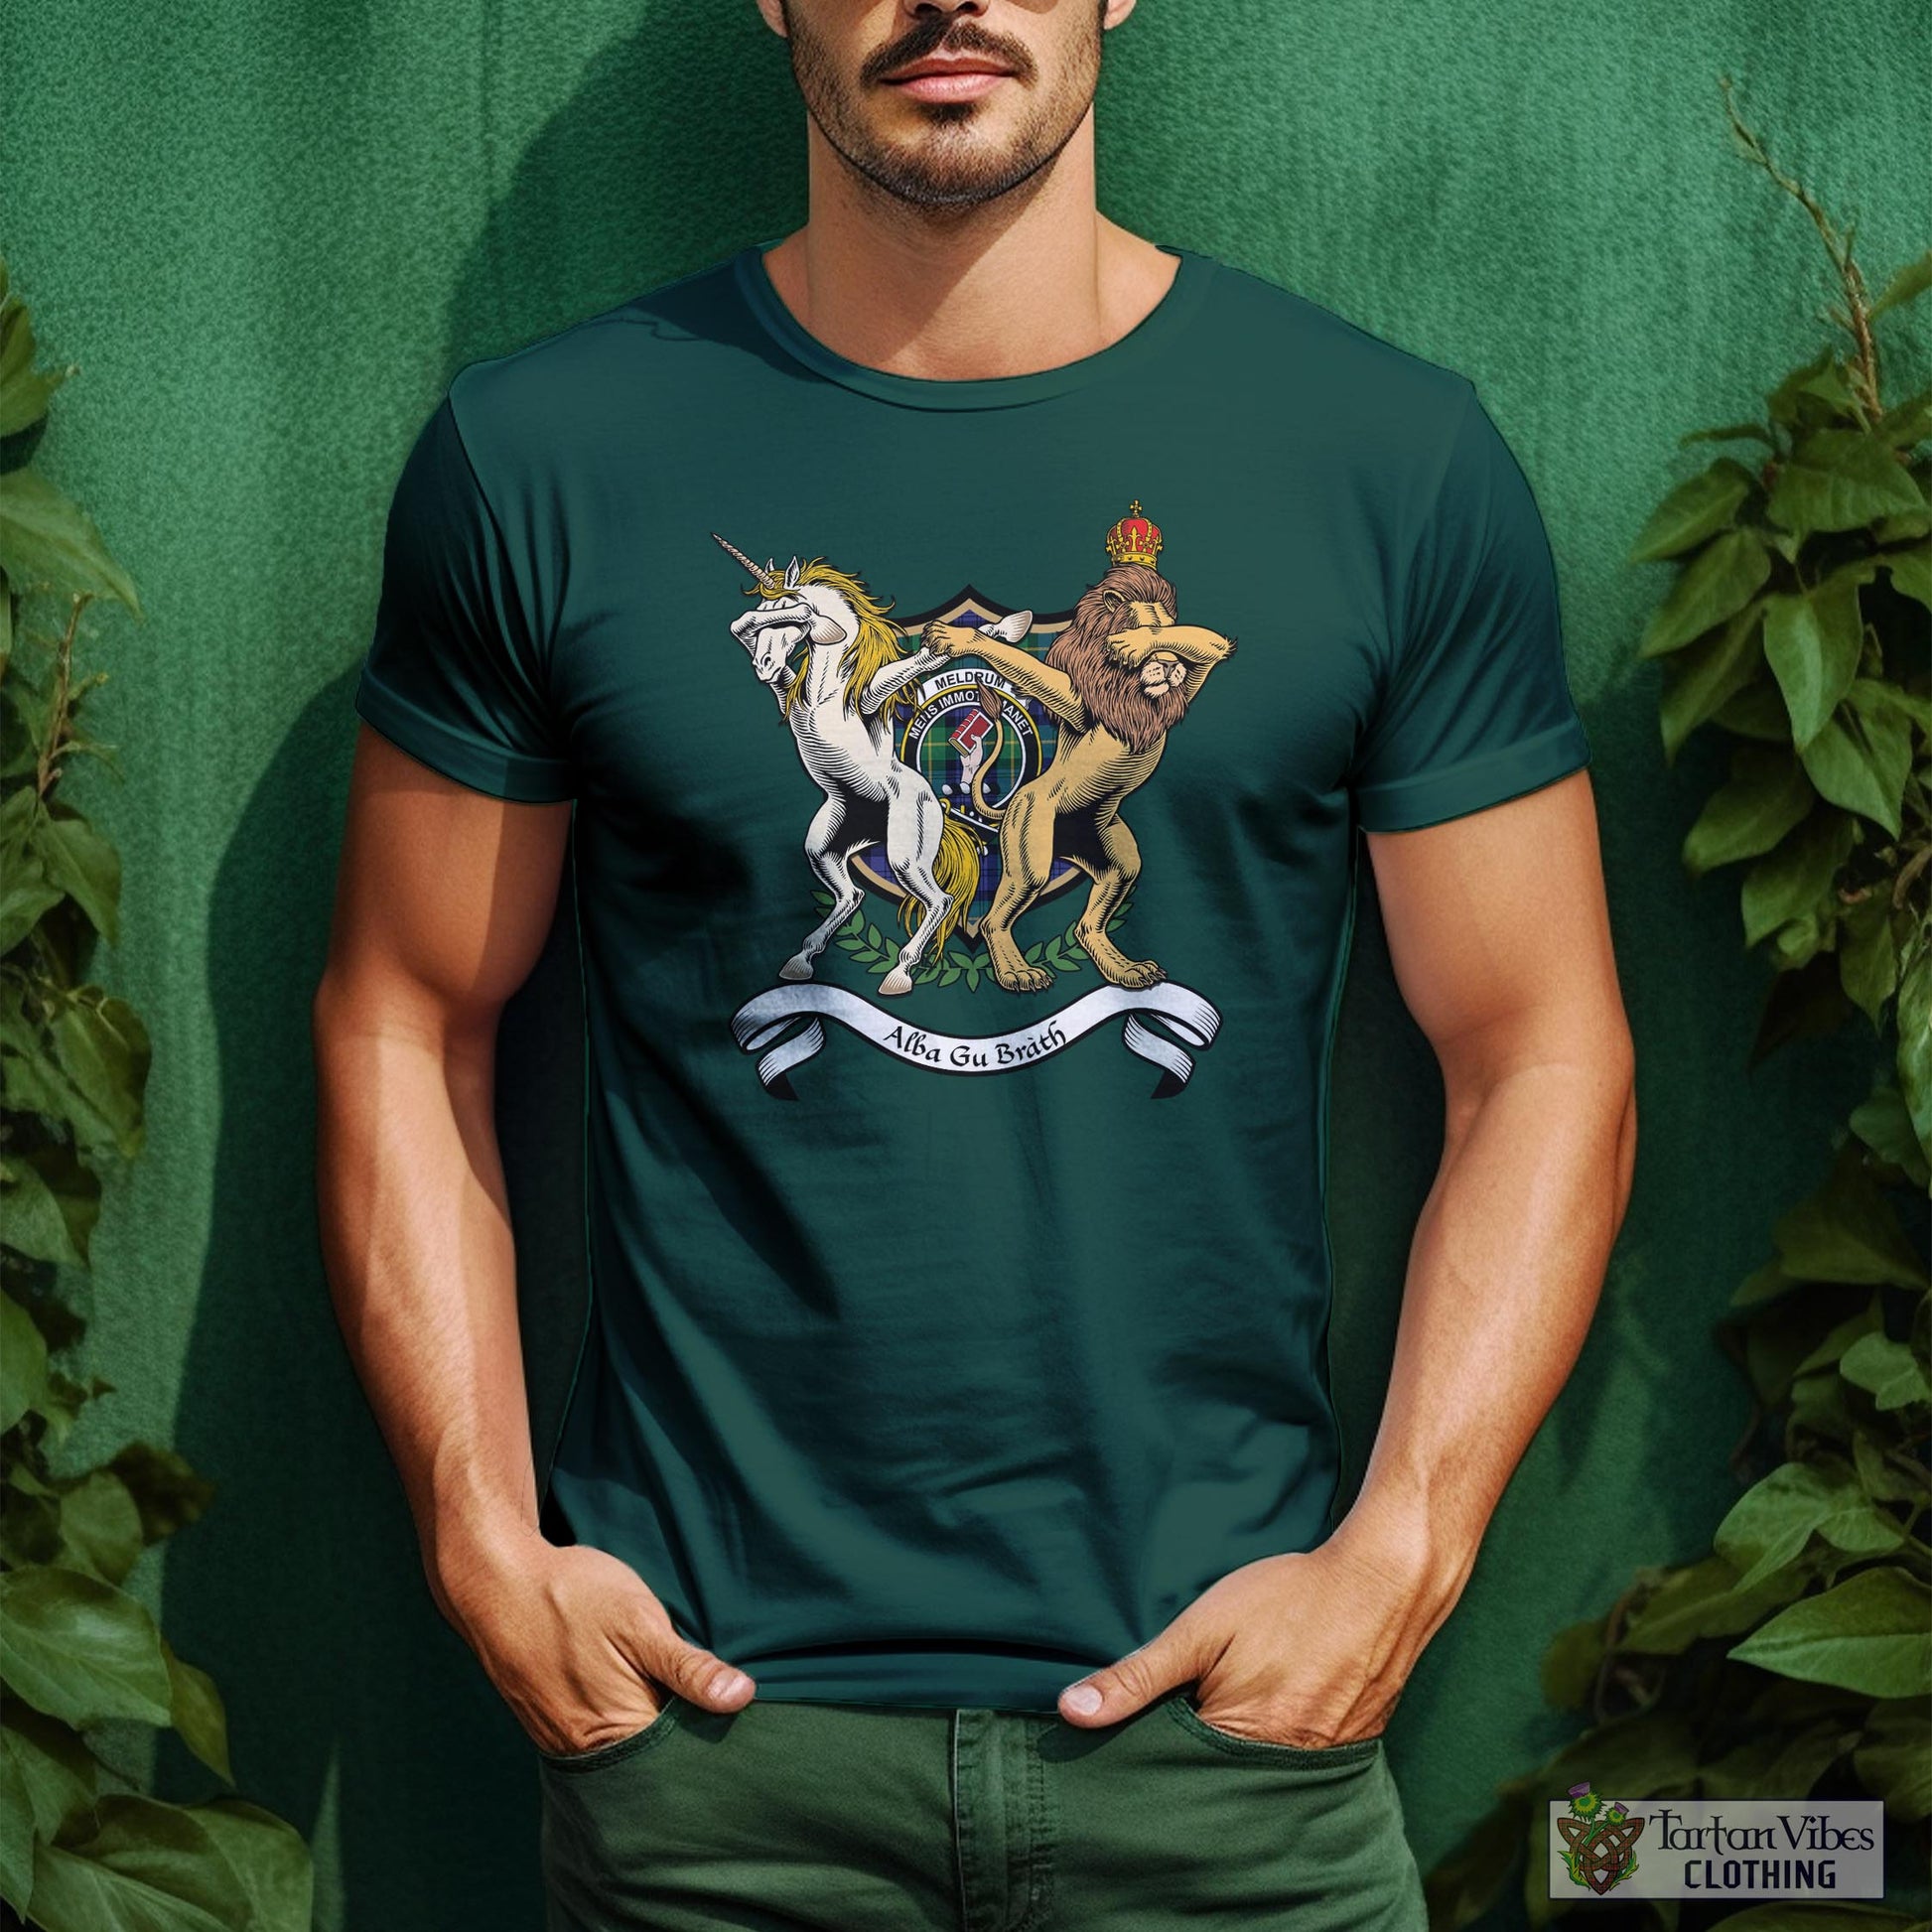 Tartan Vibes Clothing Meldrum Family Crest Cotton Men's T-Shirt with Scotland Royal Coat Of Arm Funny Style